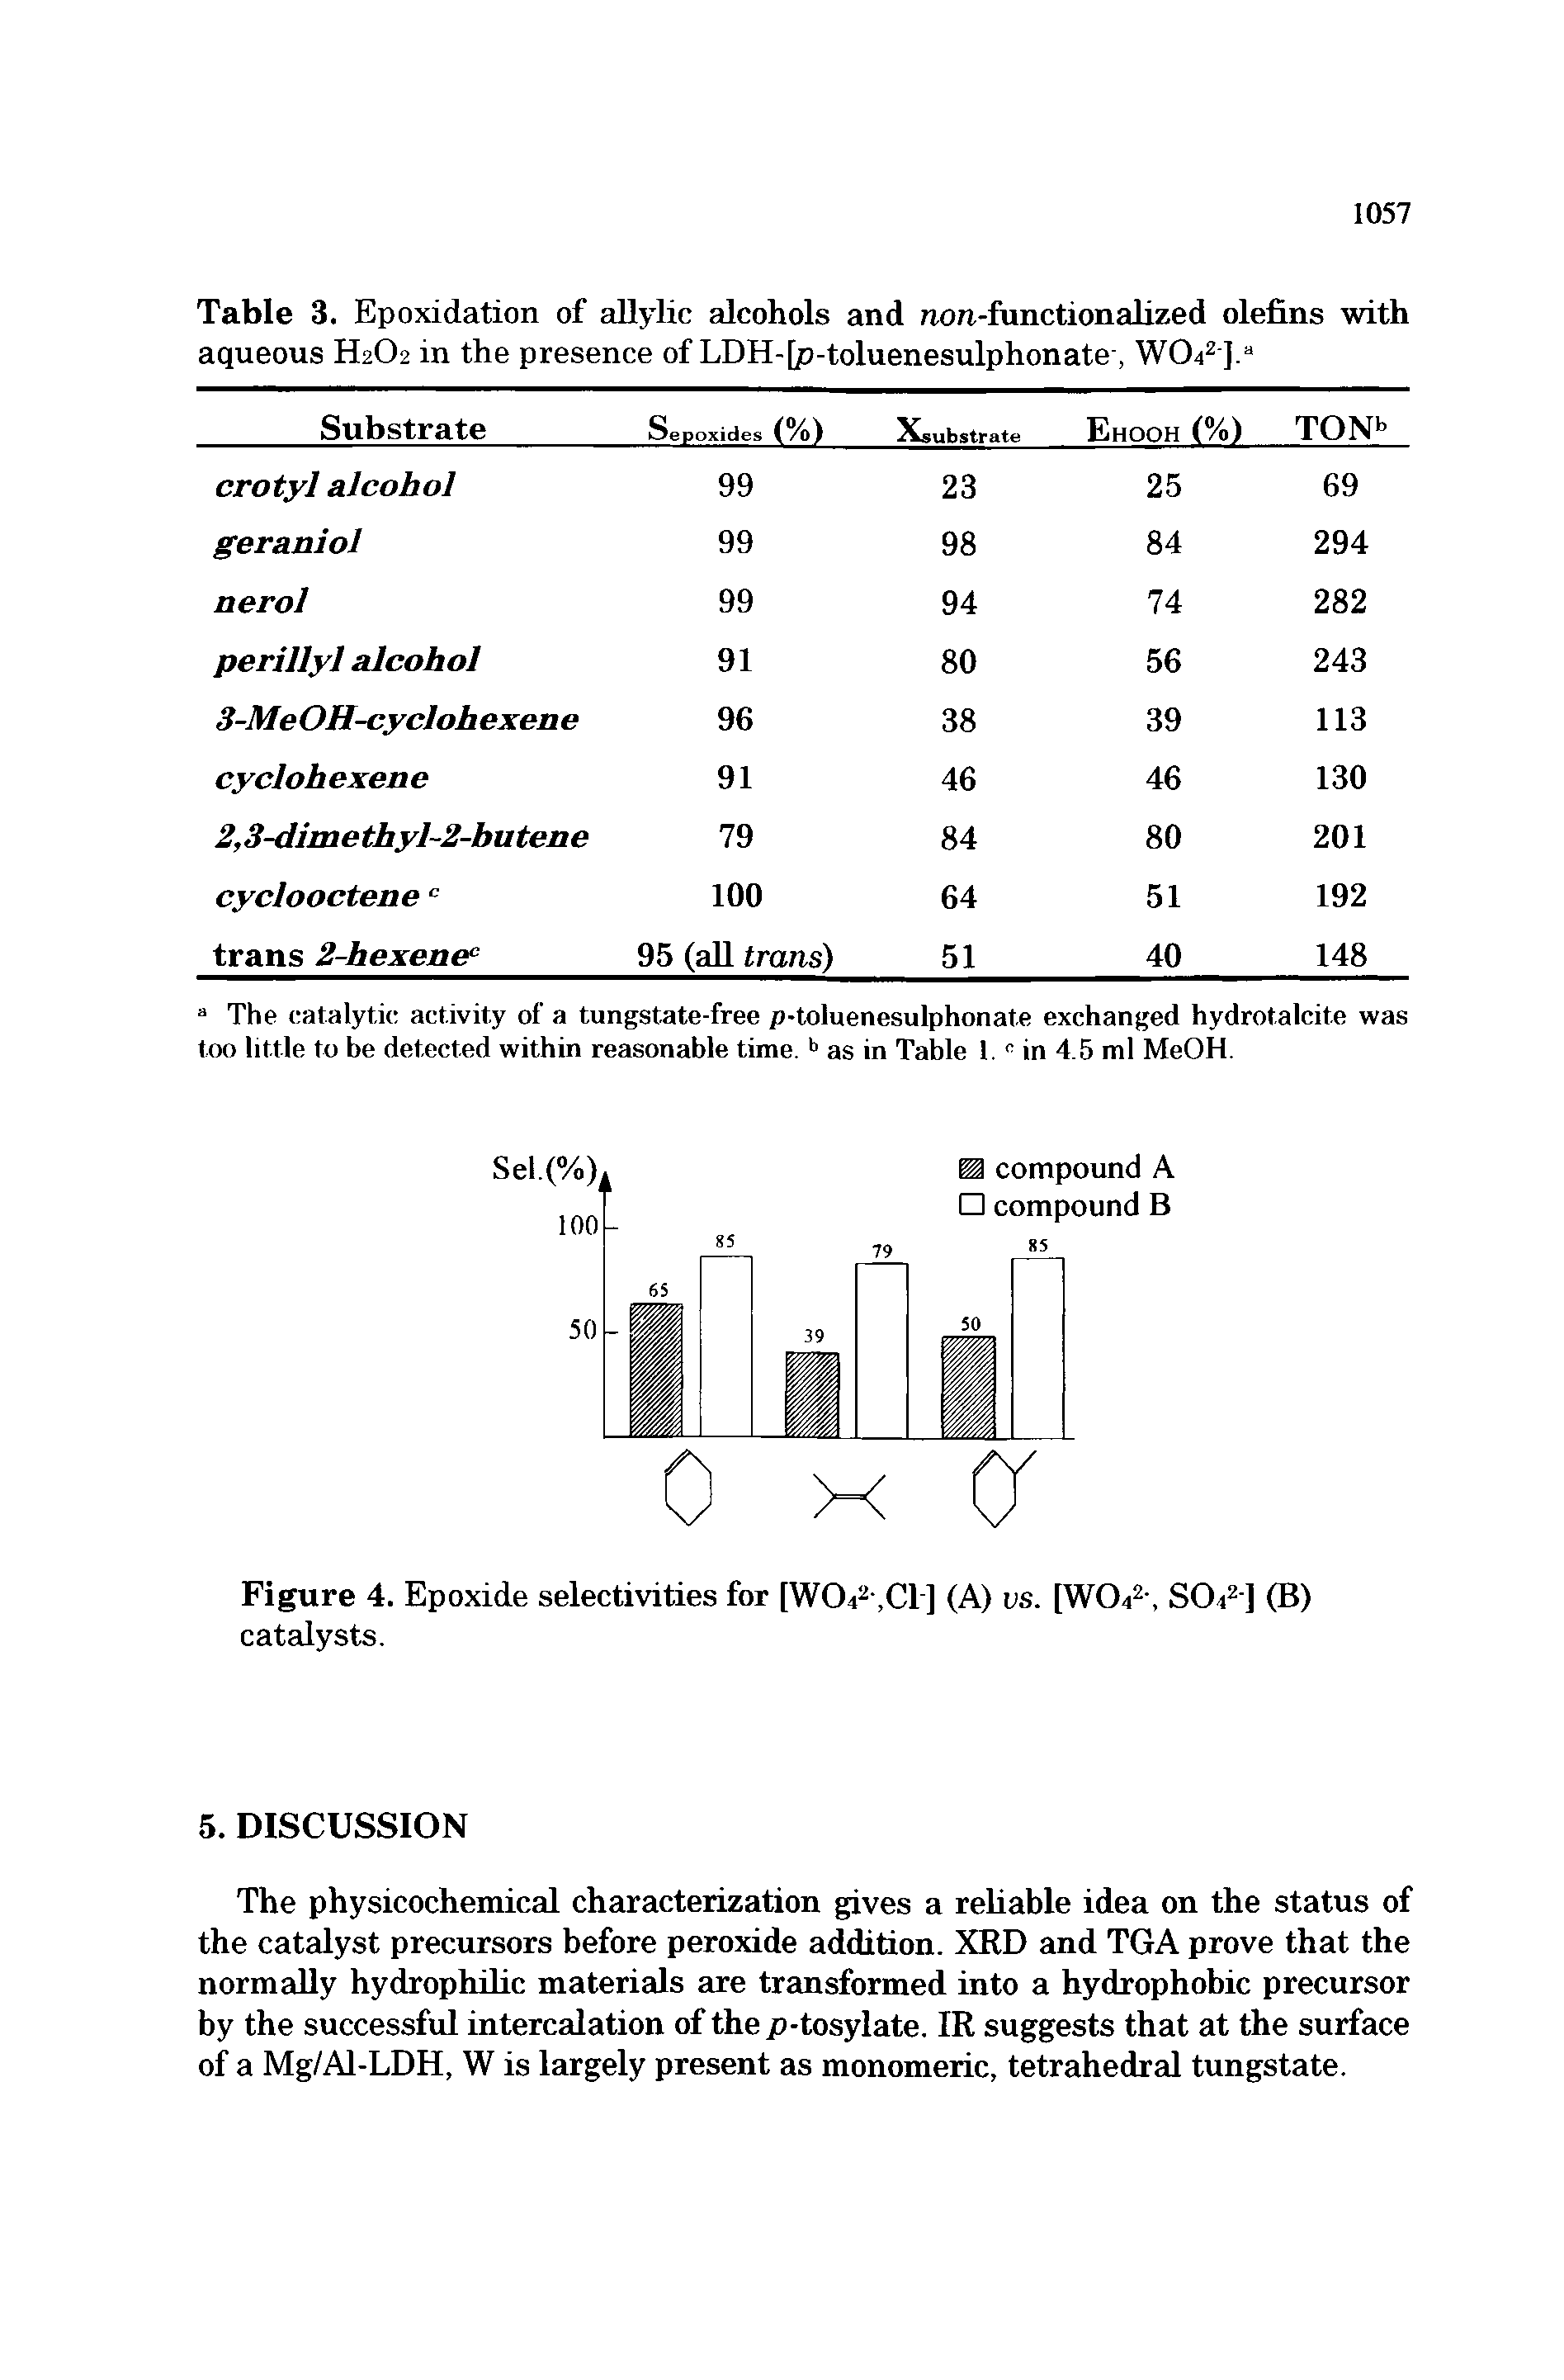 Table 3. Epoxidation of allylic alcohols and non-functionalized olefins with aqueous H2O2 in the presence of LDH-[p-toluenesulphonate, W04 ]. ...